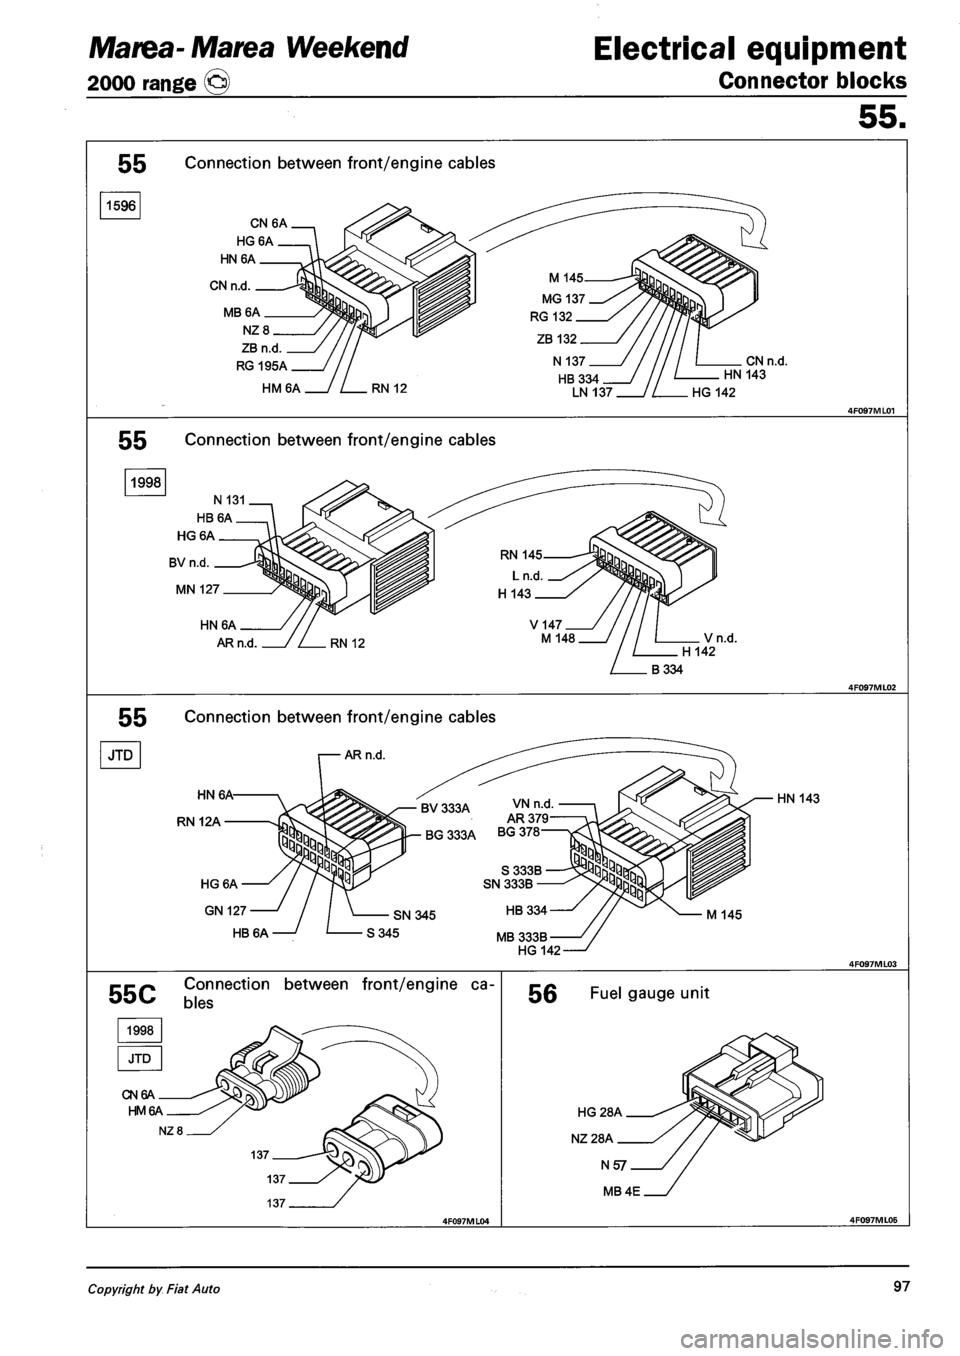 FIAT MAREA 2000 1.G Workshop Manual Marea- Marea Weekend 
2000 range © 
Electrical equipment 
Connector blocks 
55. 
55 Connection between front/engine cables 
1596 
CN 6A 
HG6A 
HN6A 
CN n.d. 
MB6A 
NZ 8 
ZB n.d 
RG 195A 
HM6A 
CN n.d